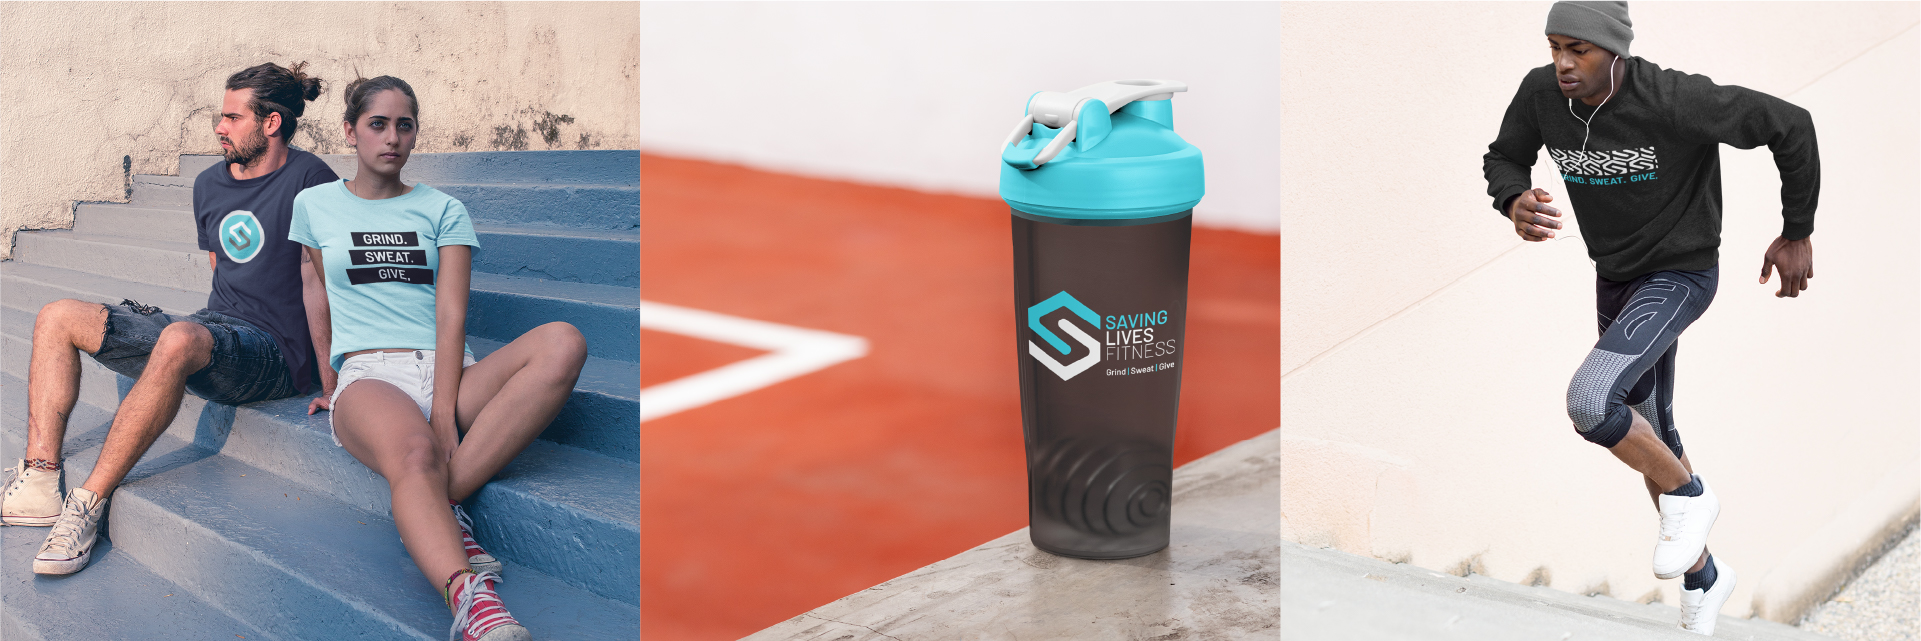 Apparel, shaker protein bottle, and hoodie designed by REMEDY for Saving Lives Fitness